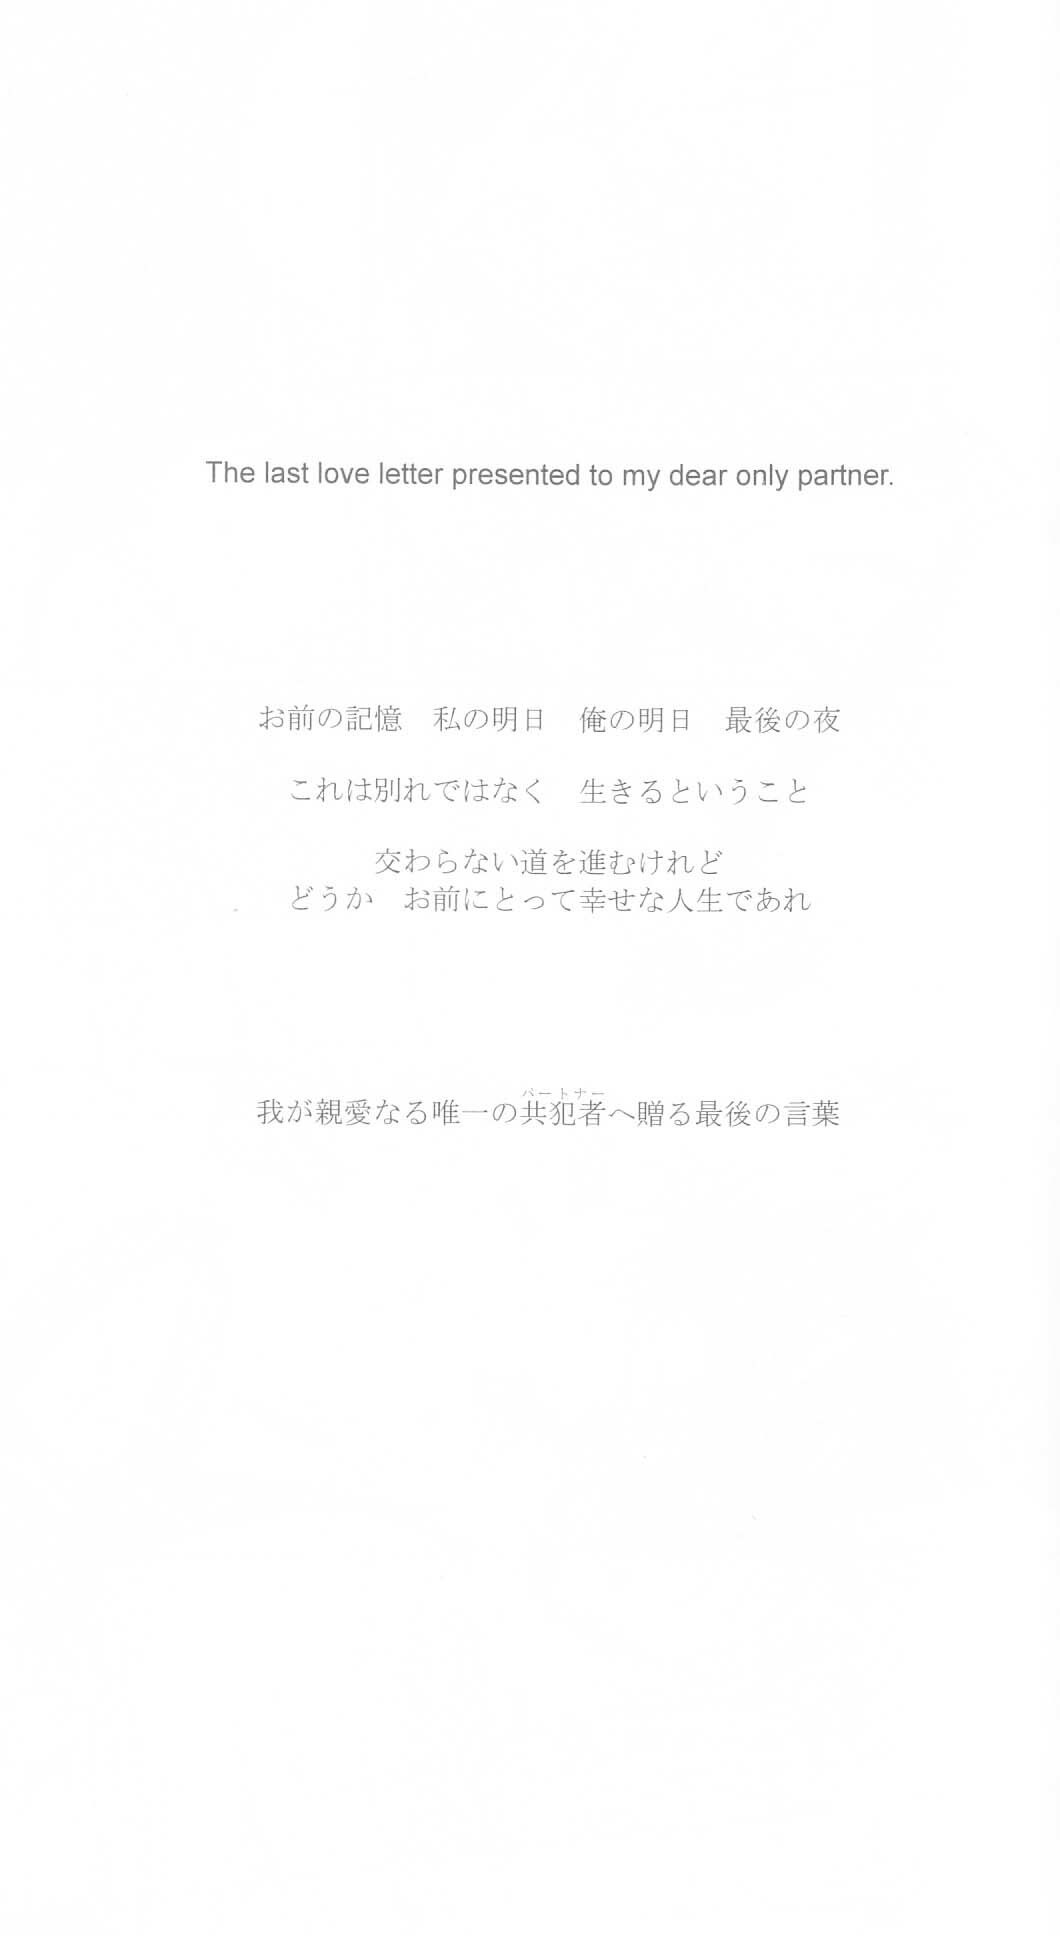 [APRICOT TEA] The last love letter presented to my dear only partner. (Code Geass) page 2 full